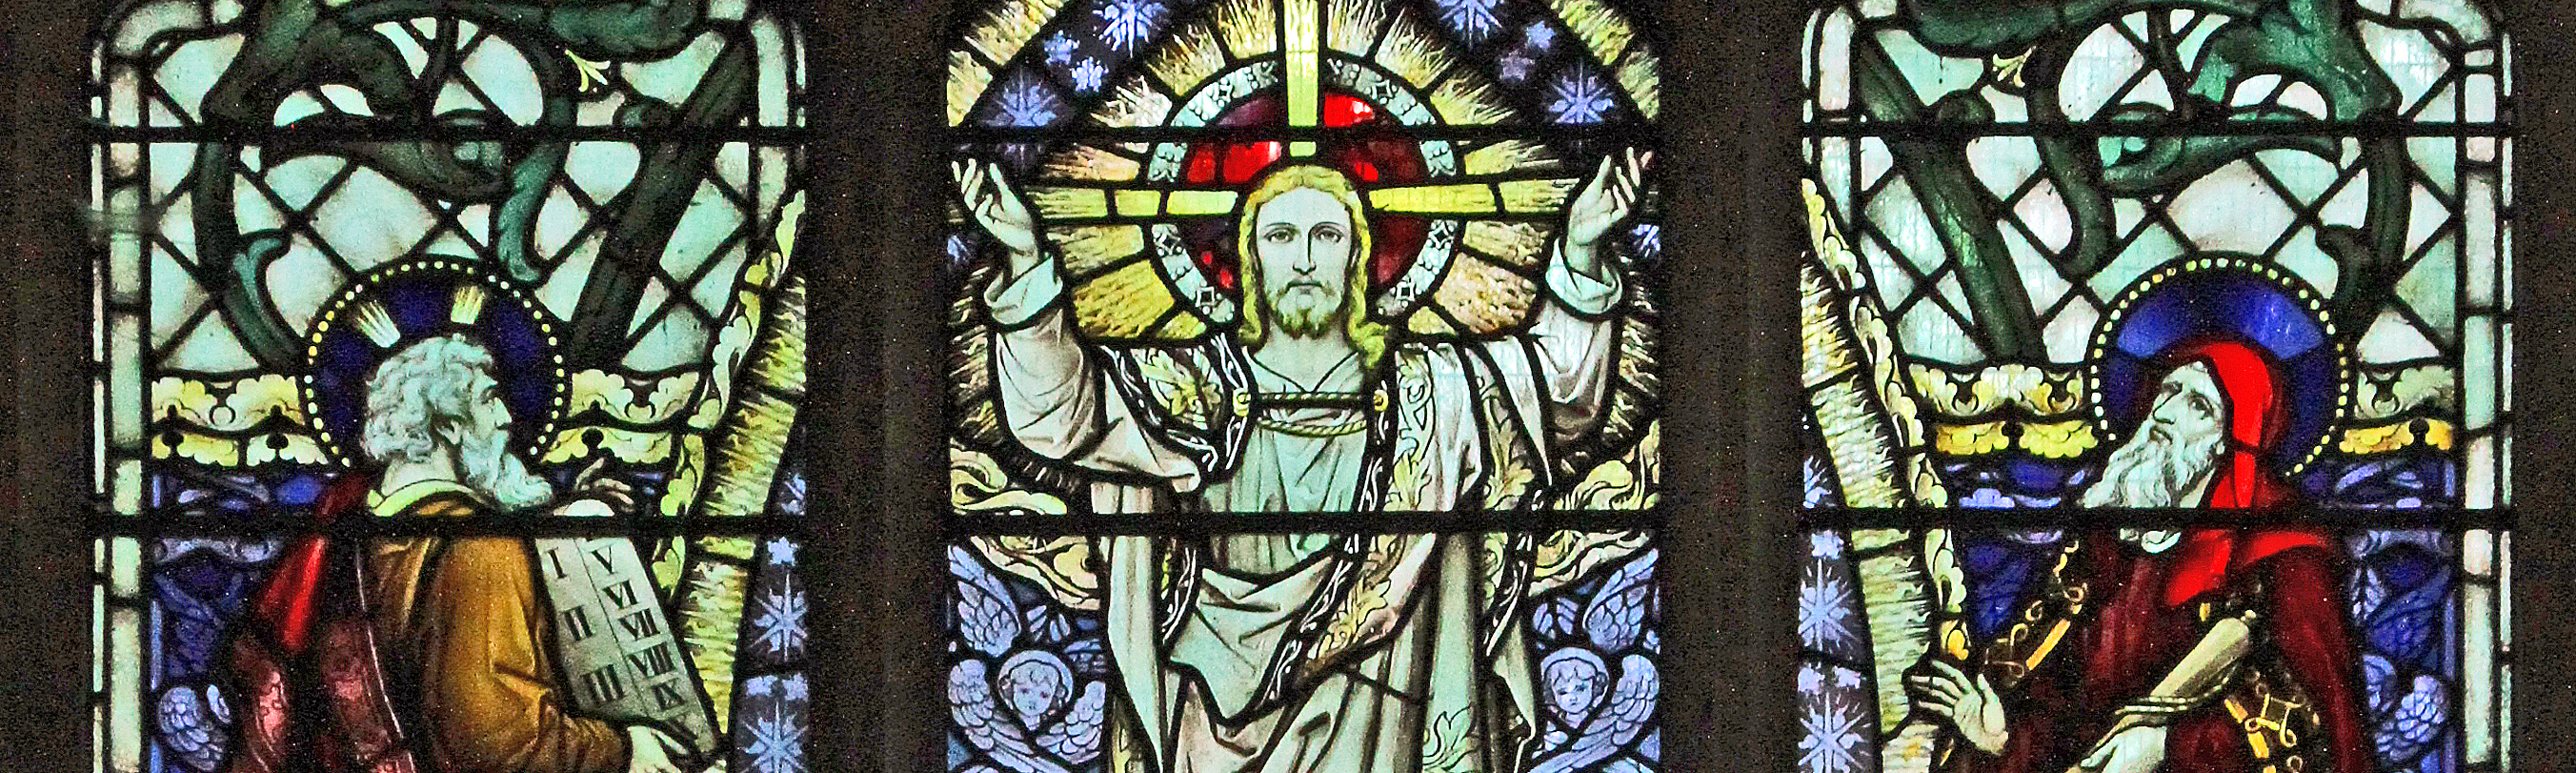 Details from East Window of Billingford St Peter